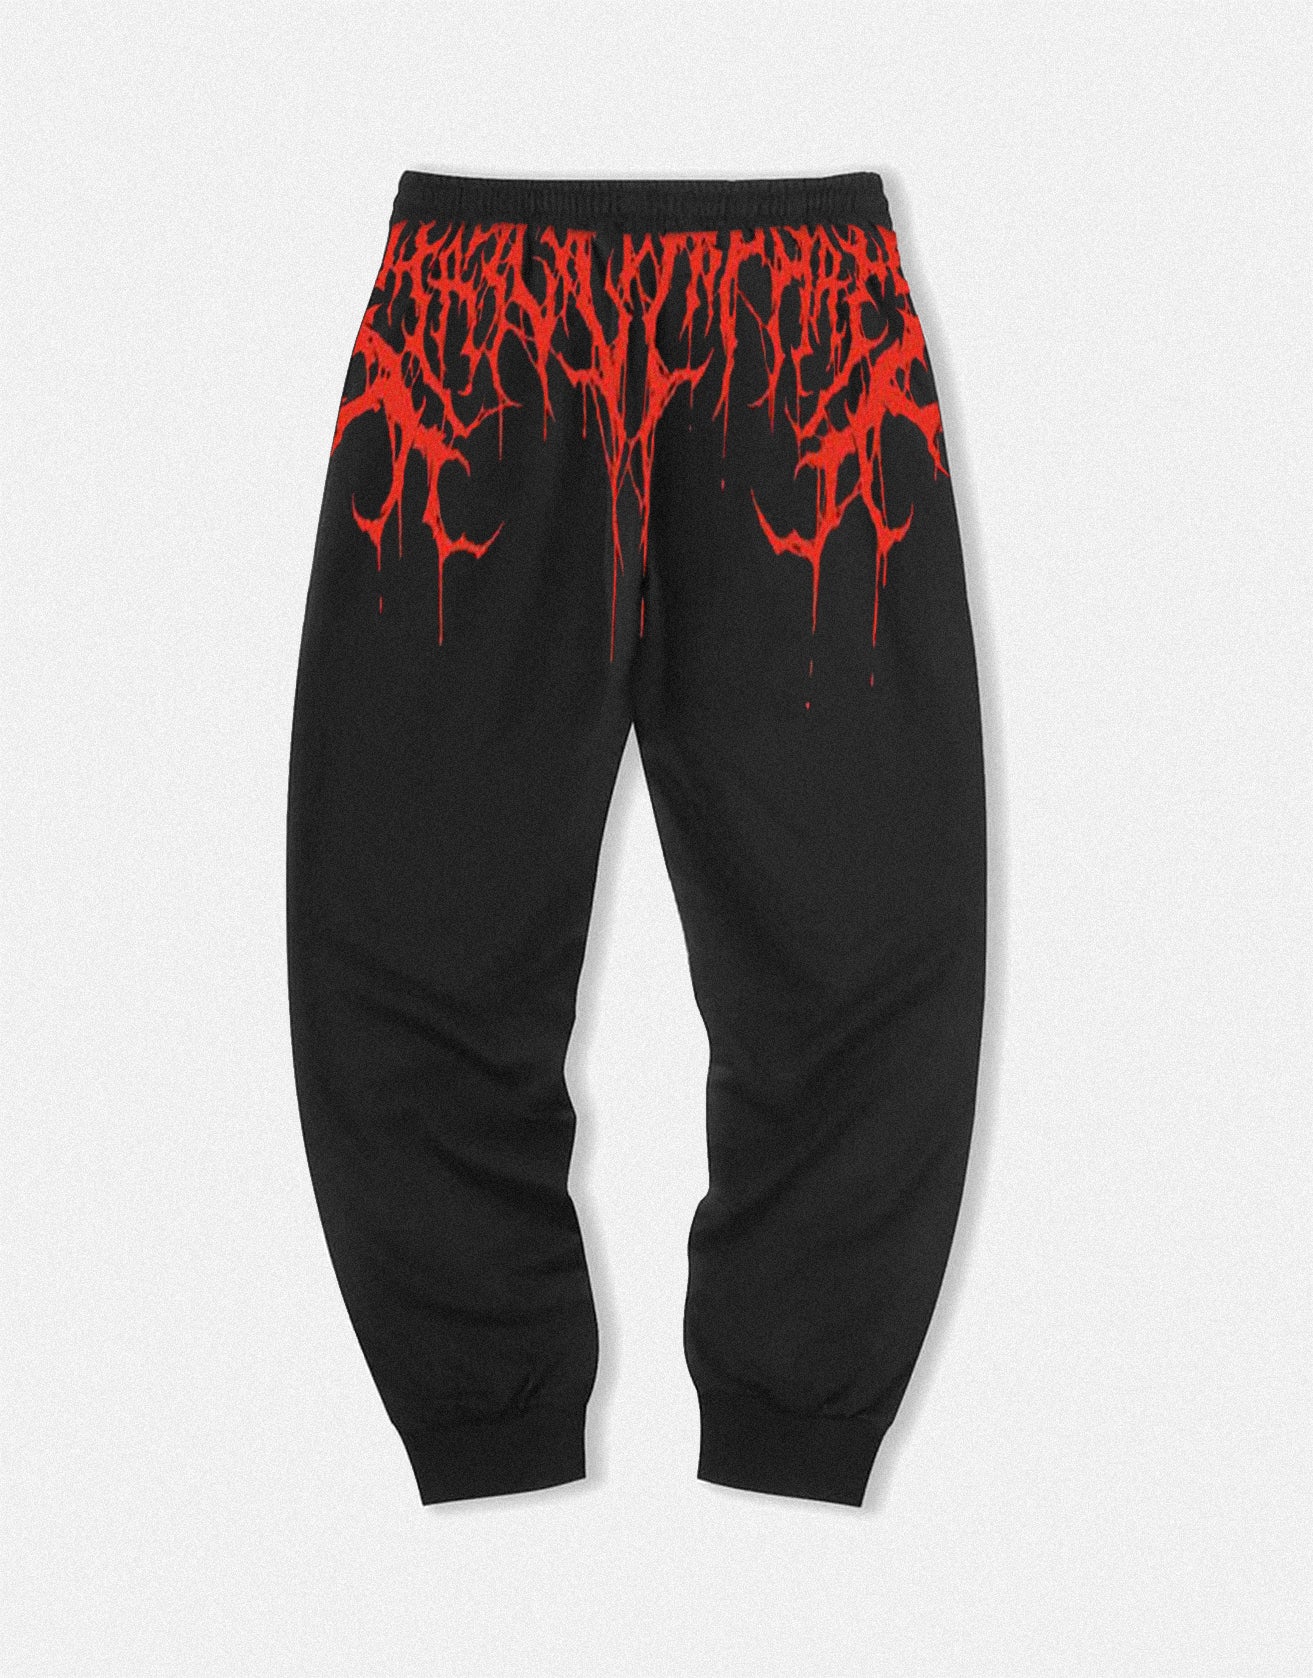 Blood Red Coil Devil Casual Sweatpants